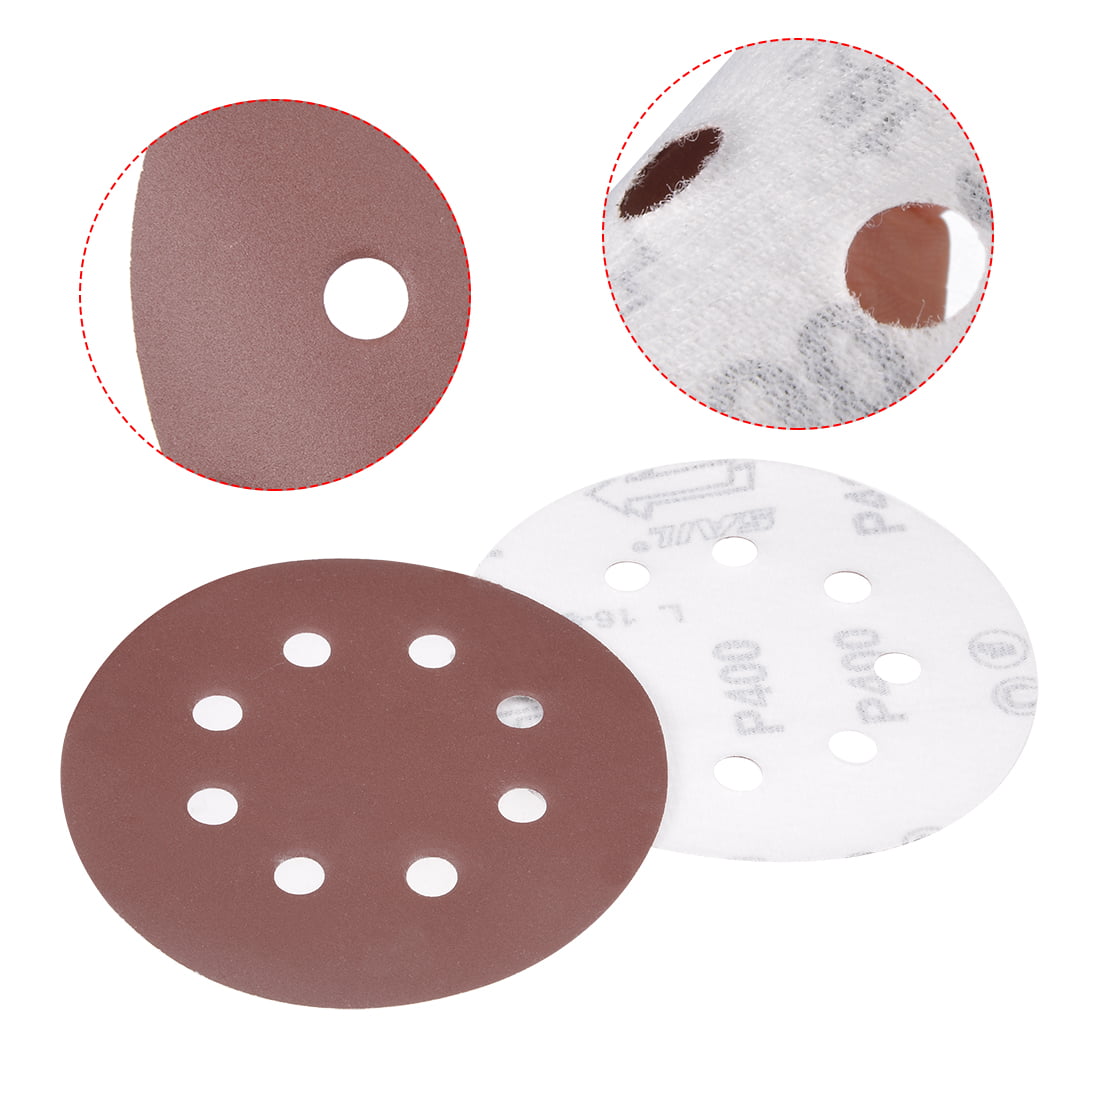 120 Grit Pack of 10 Silverline 273151 225 mm Hook and Loop Discs Punched